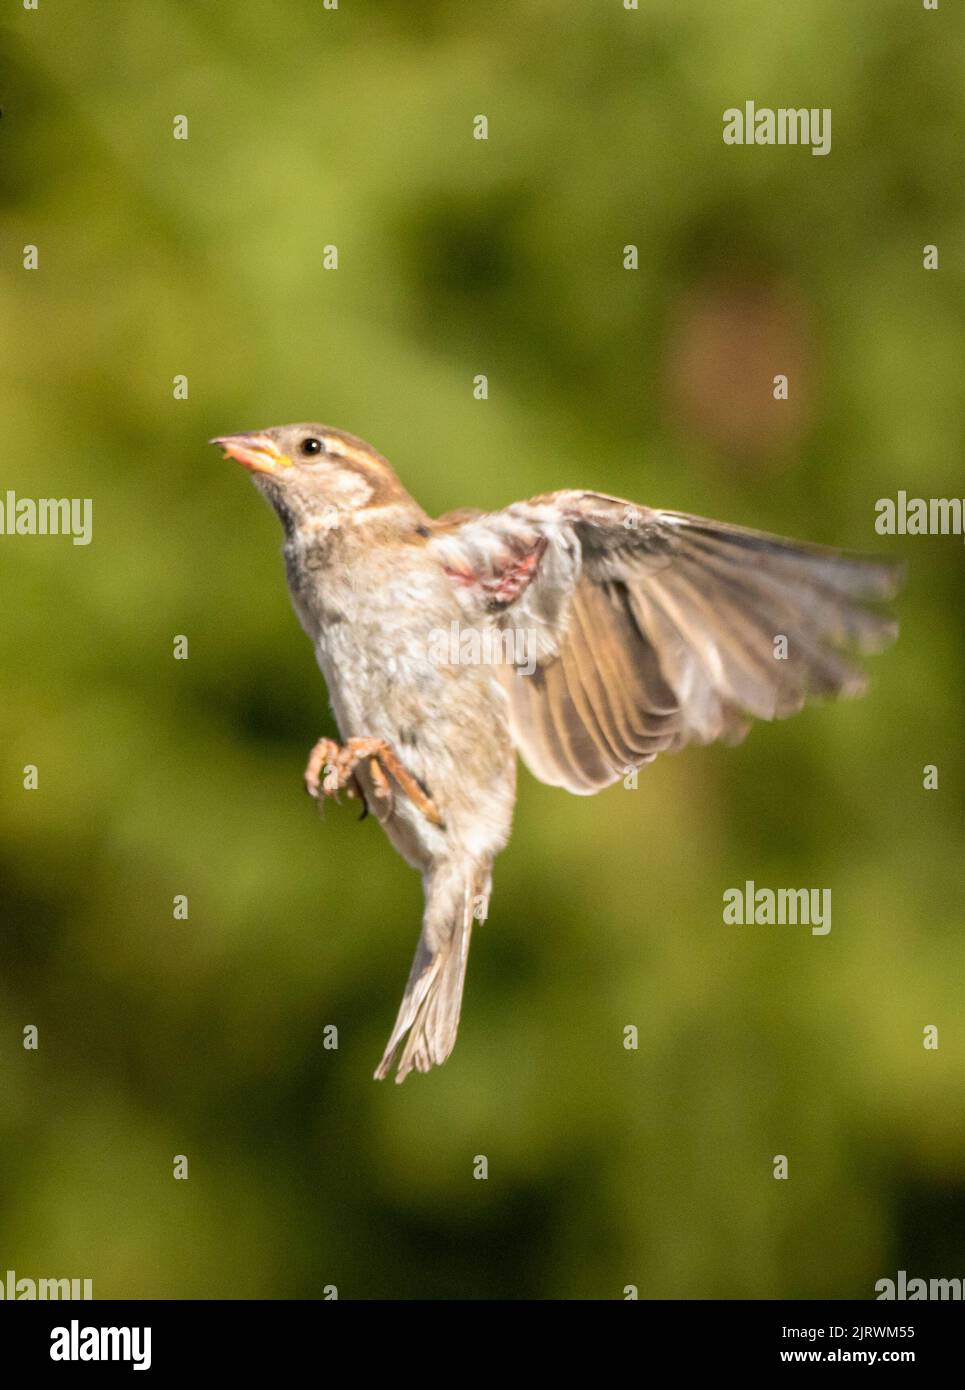 Flying House Sparrow, Passer domesticus, UK, 2022 Foto Stock